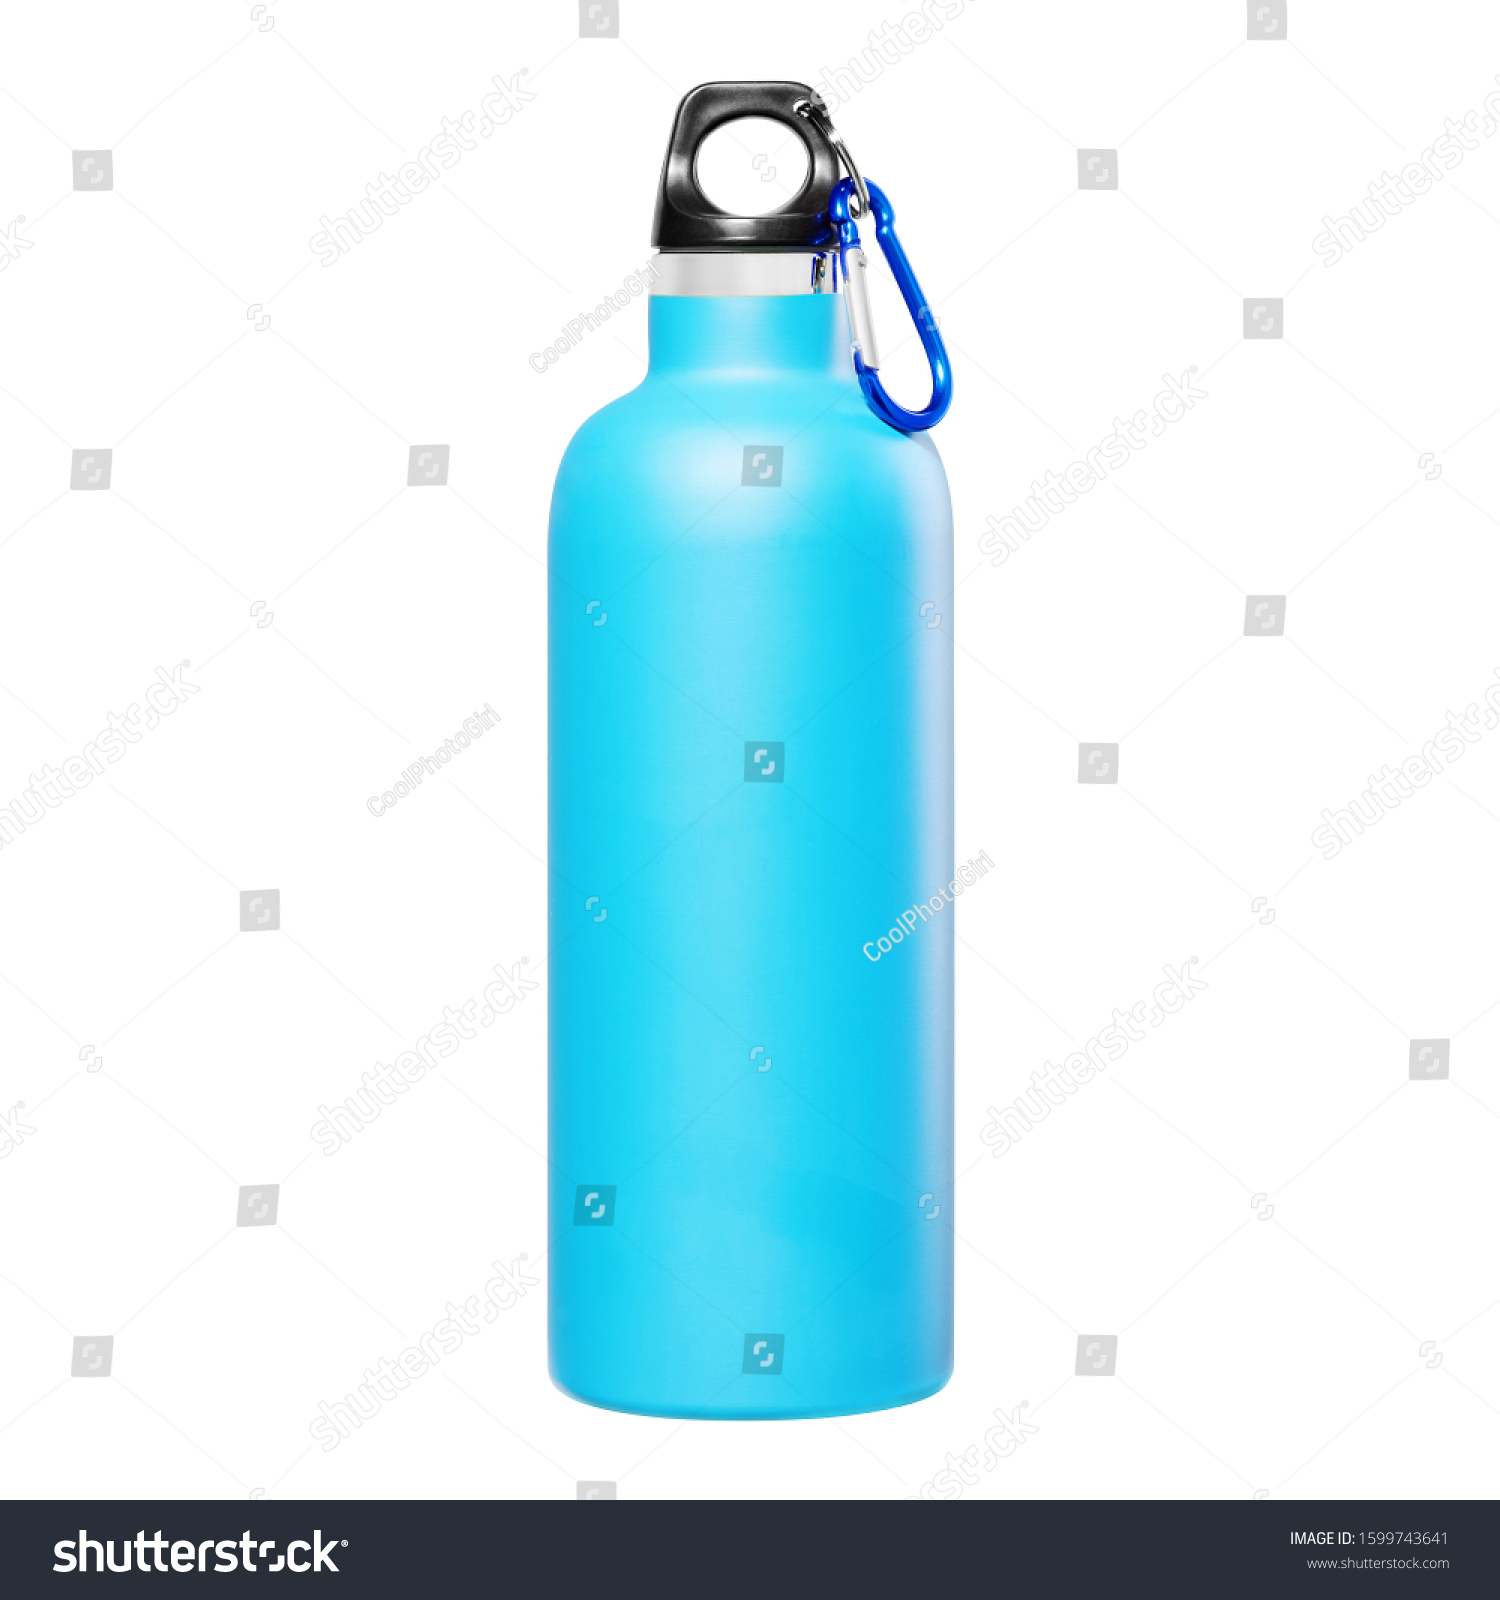 blue thermos flask